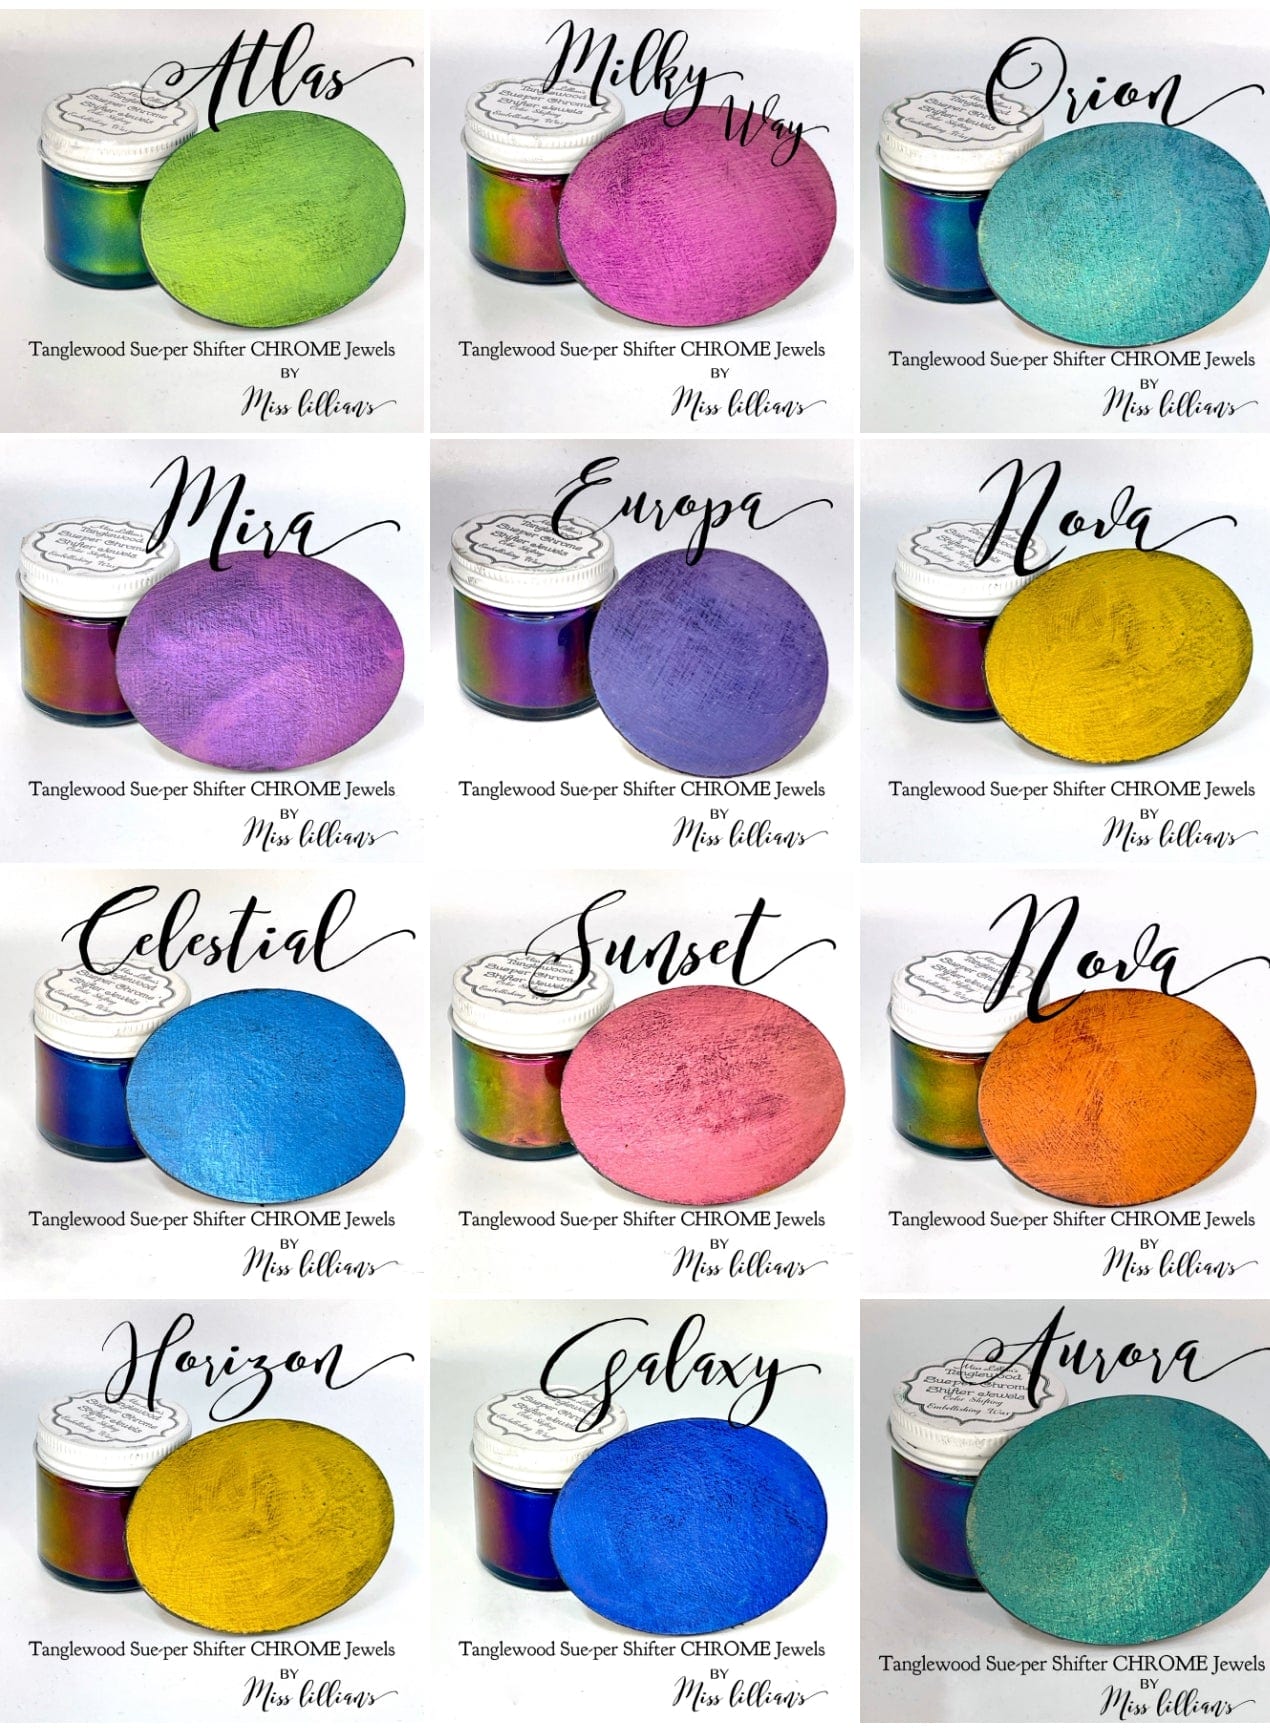 Tanglewood SuePer Shifters Craft Paint, Ink & Glaze ALCHEMY Tanglewood Sue-per Shifter Metallic Wax